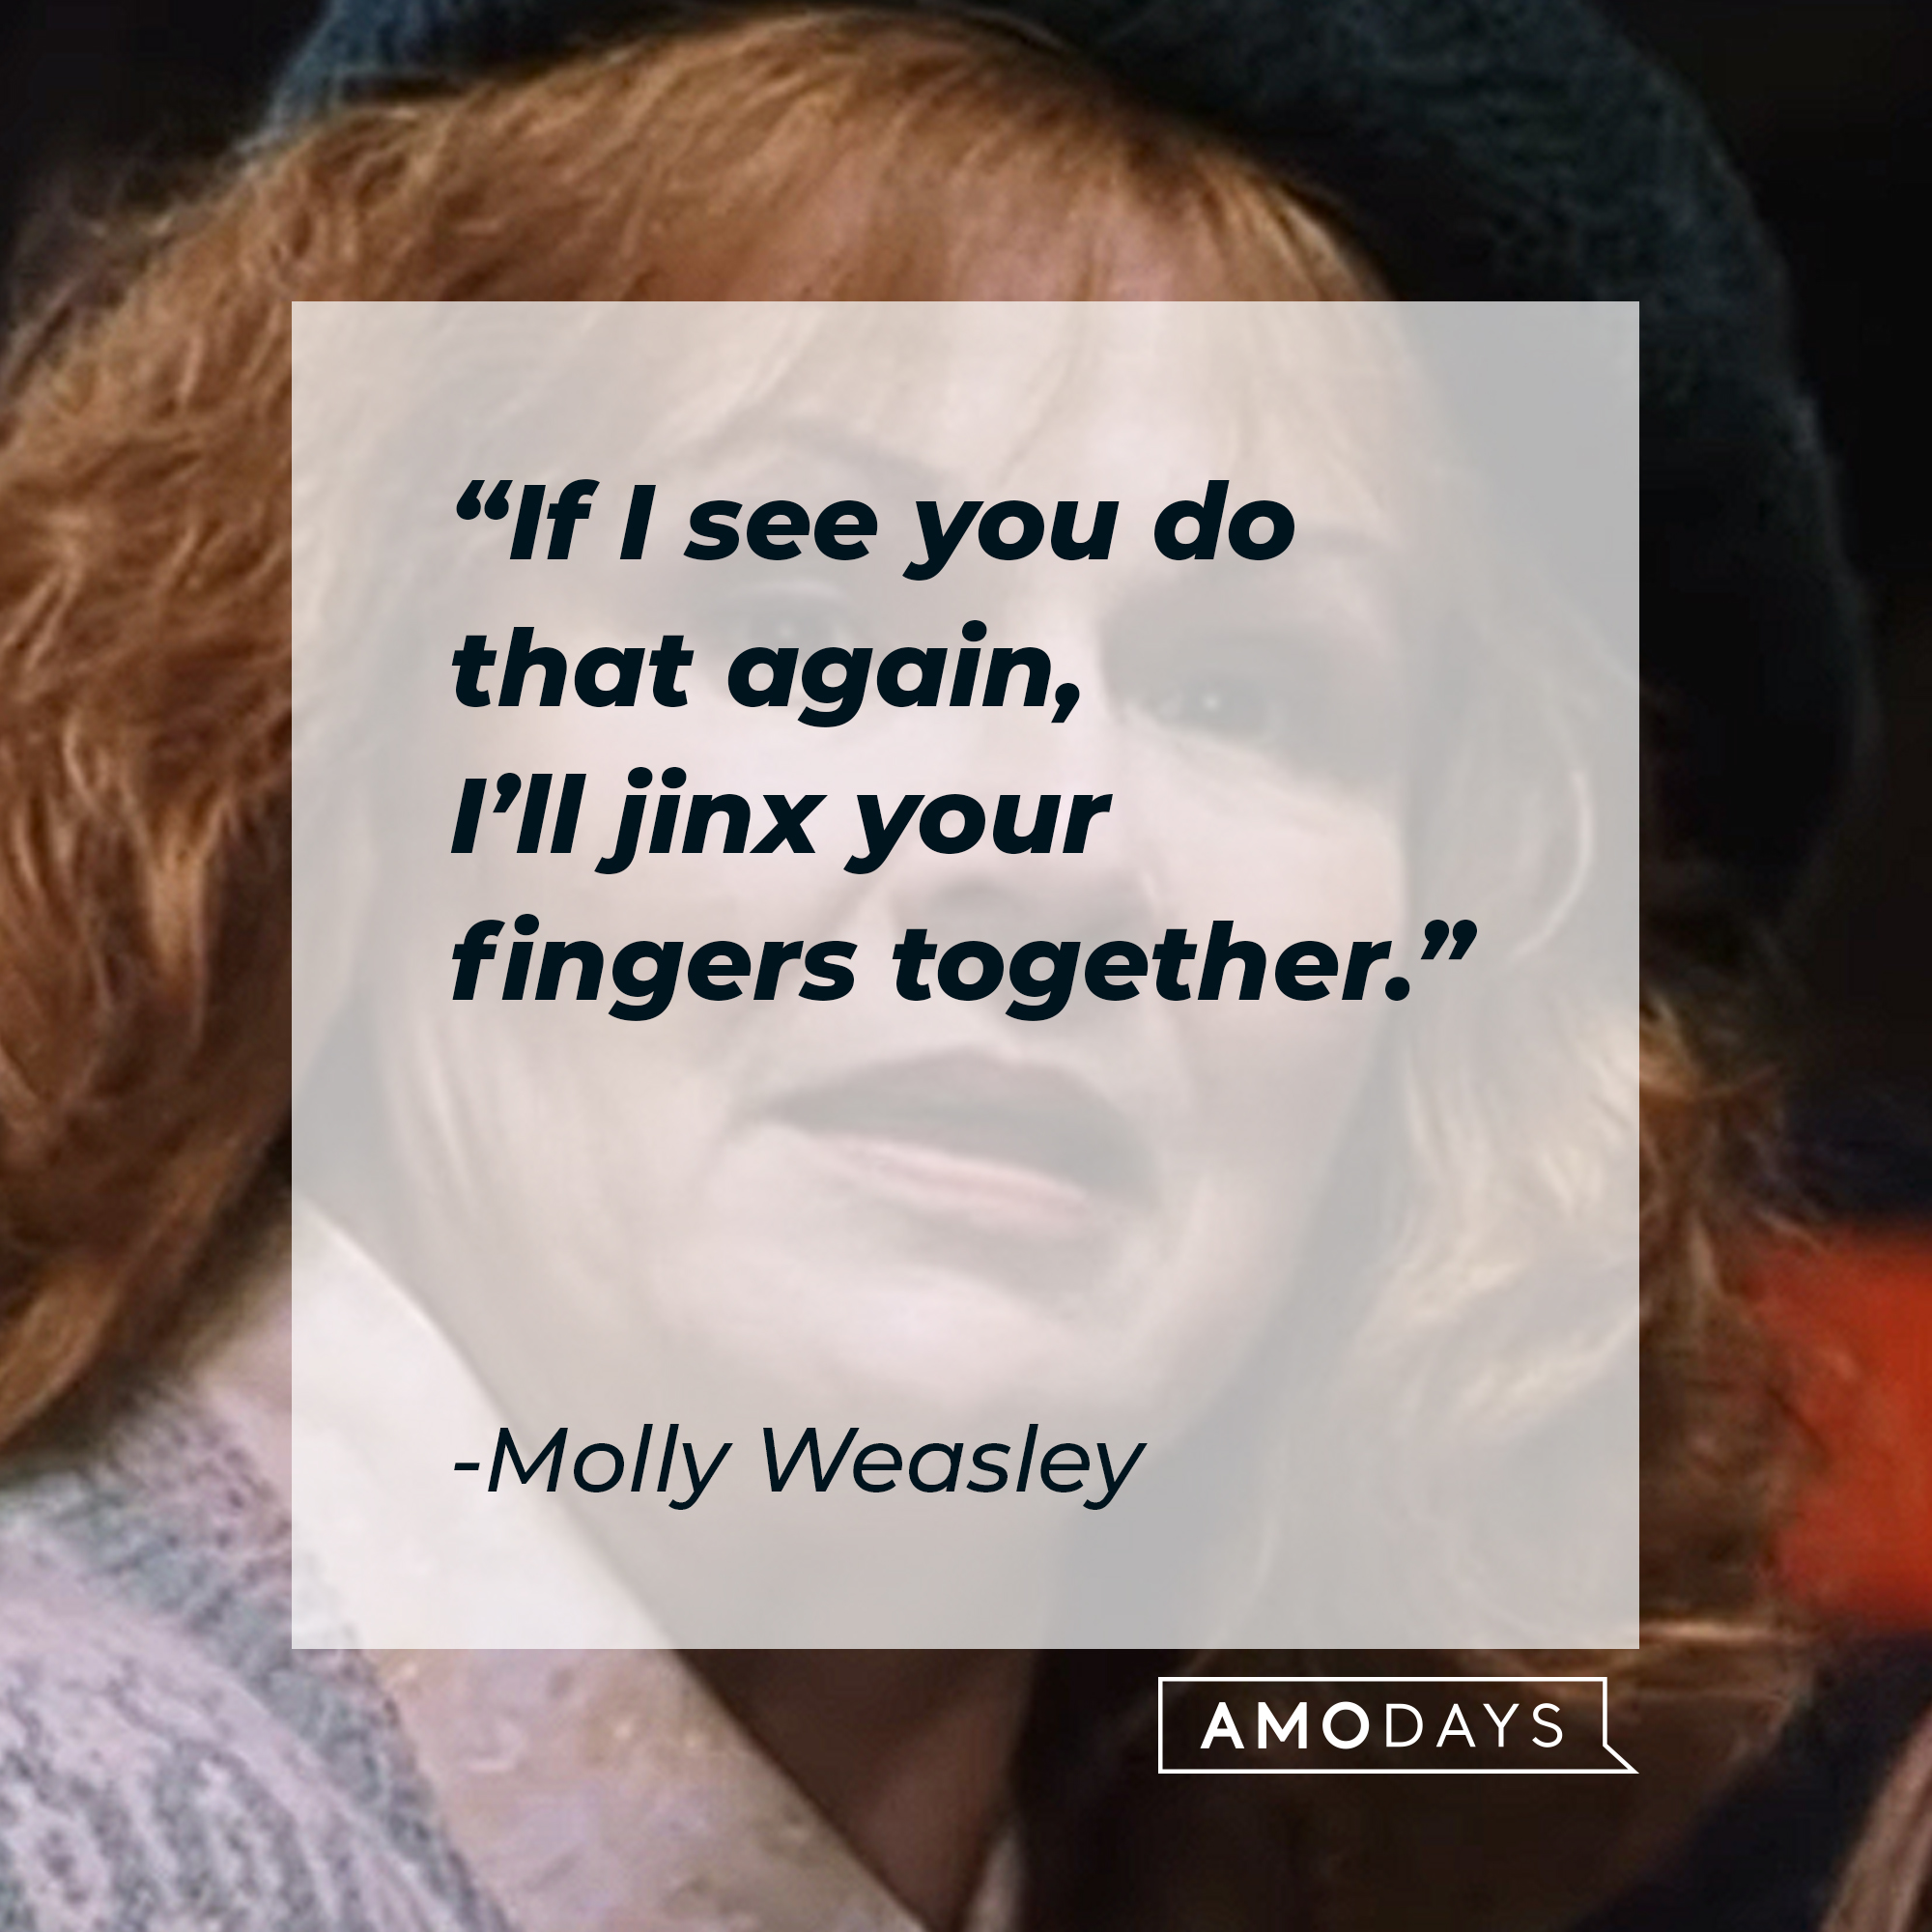 Molly Weasley's quote: "If I see you do that again, I’ll jinx your fingers together." | Source: Youtube.com/harrypotter